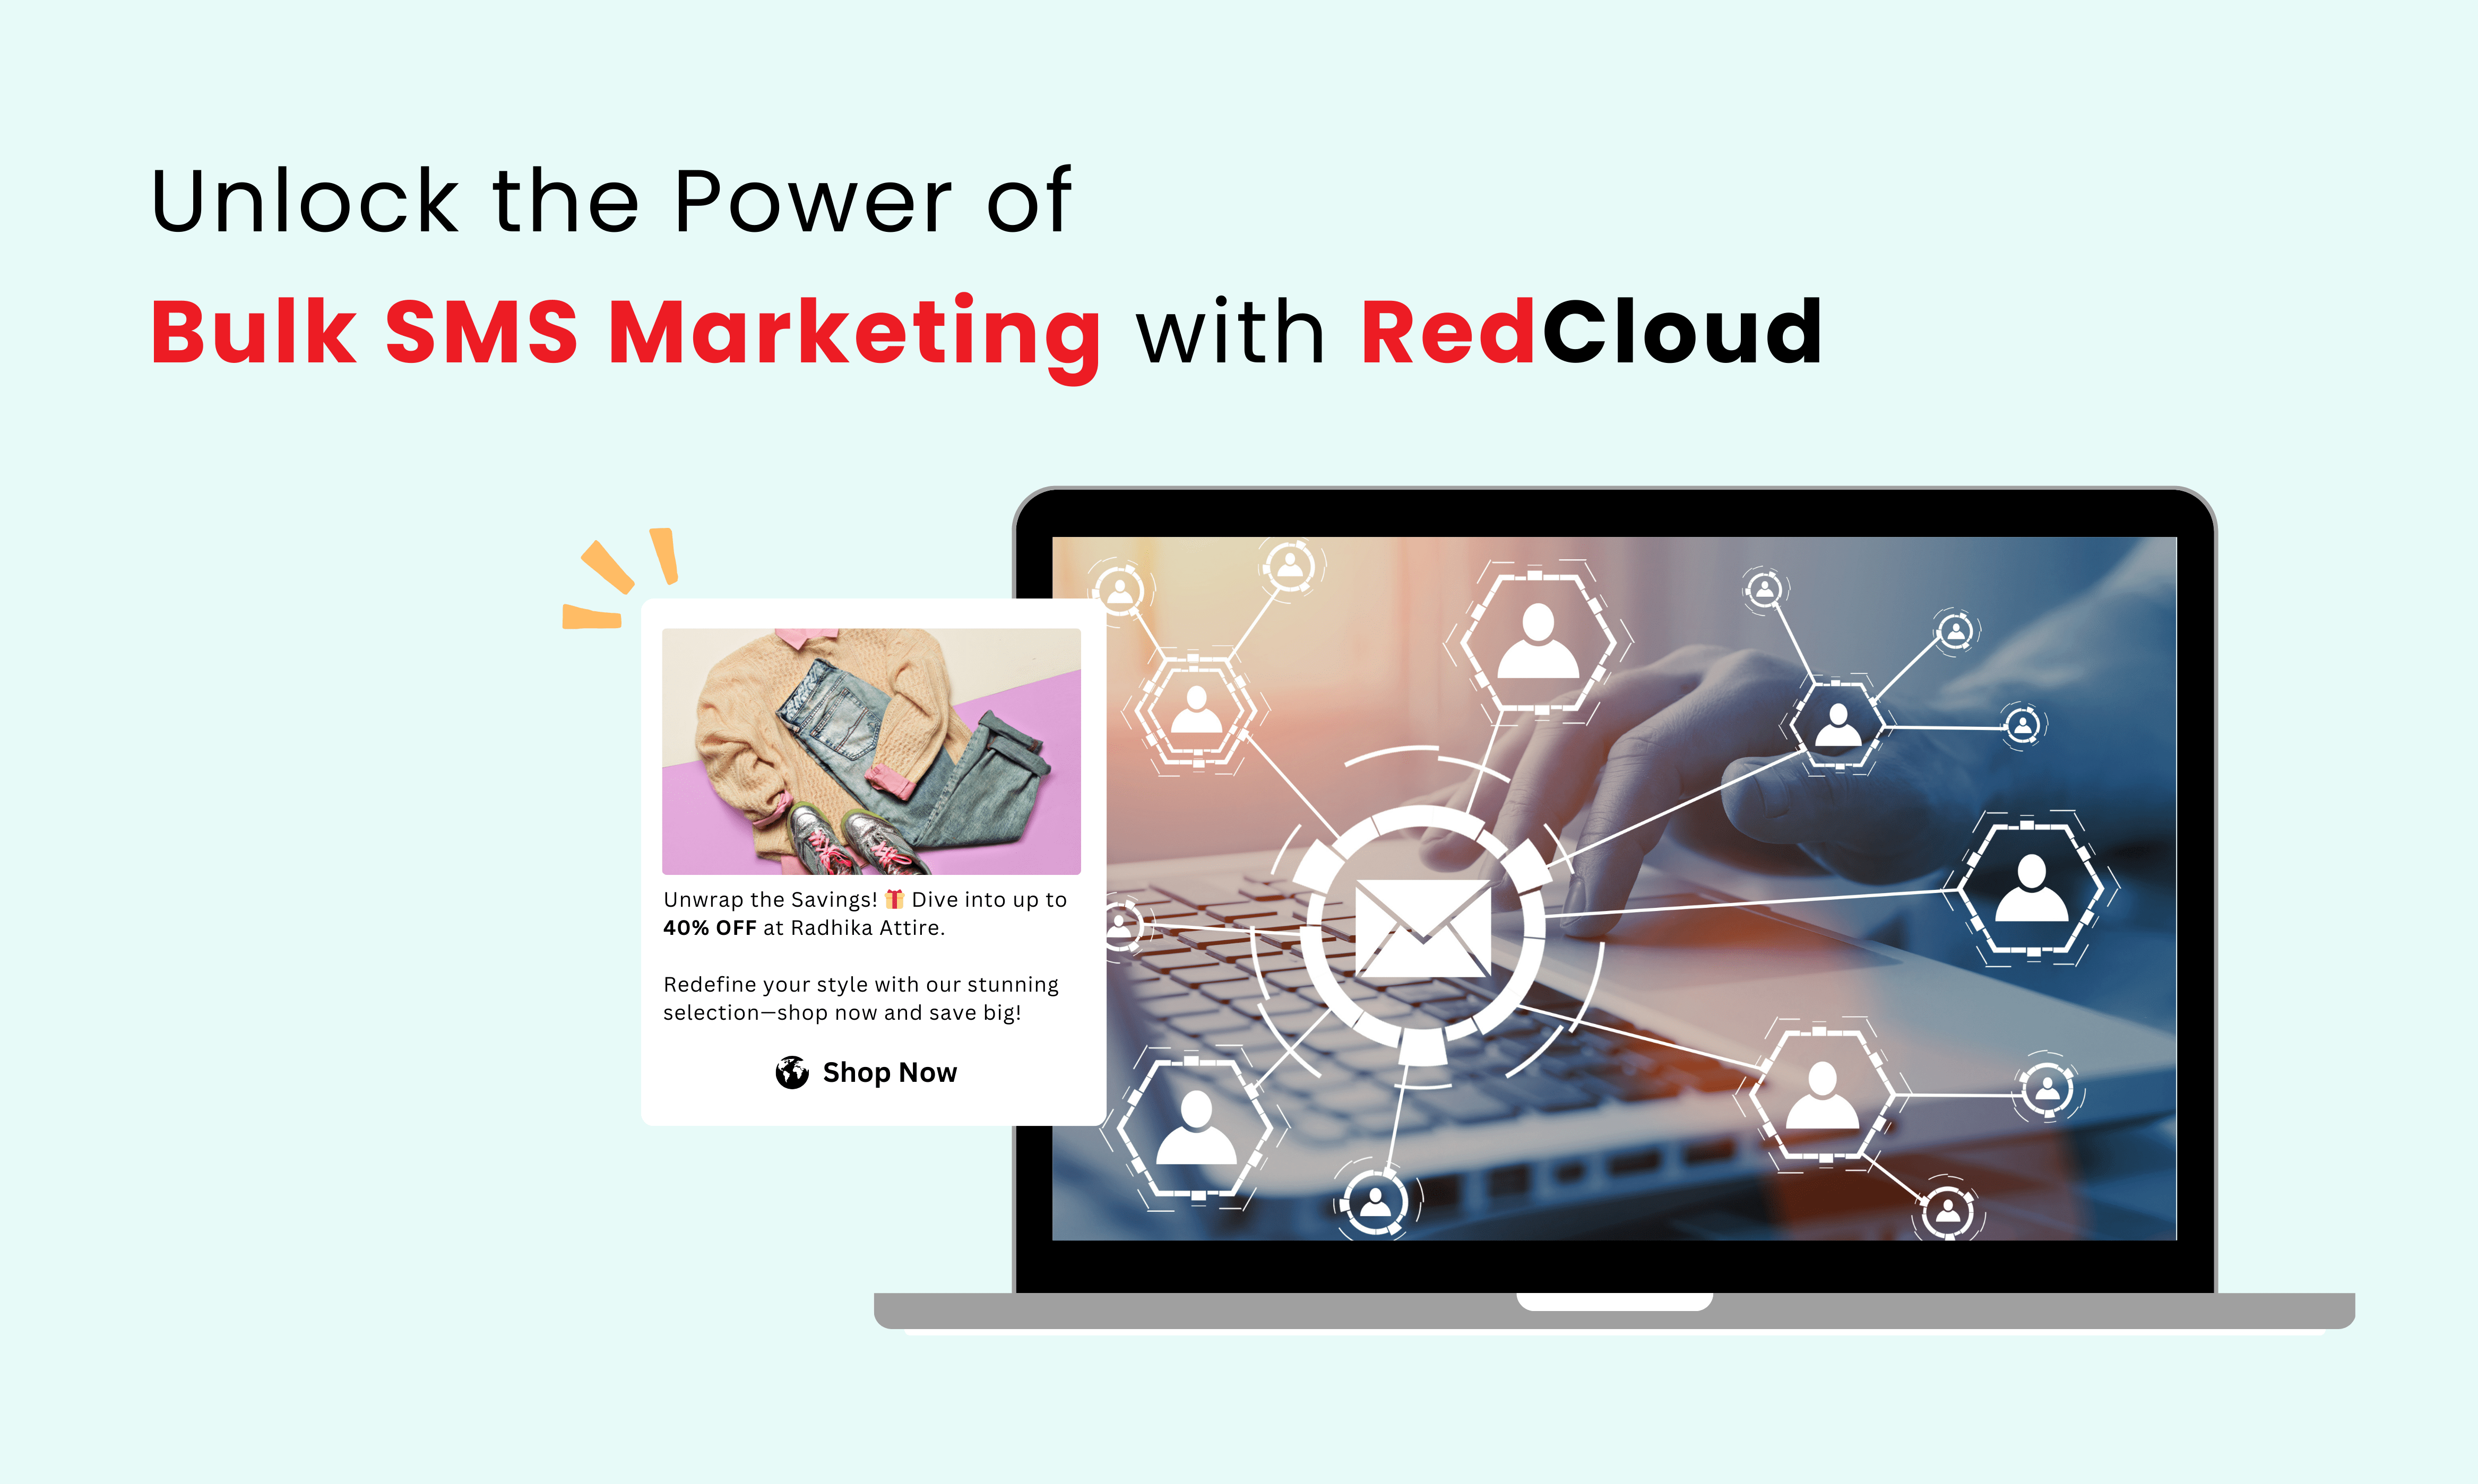 Unlock the Power of Bulk SMS Marketing with RedCloud